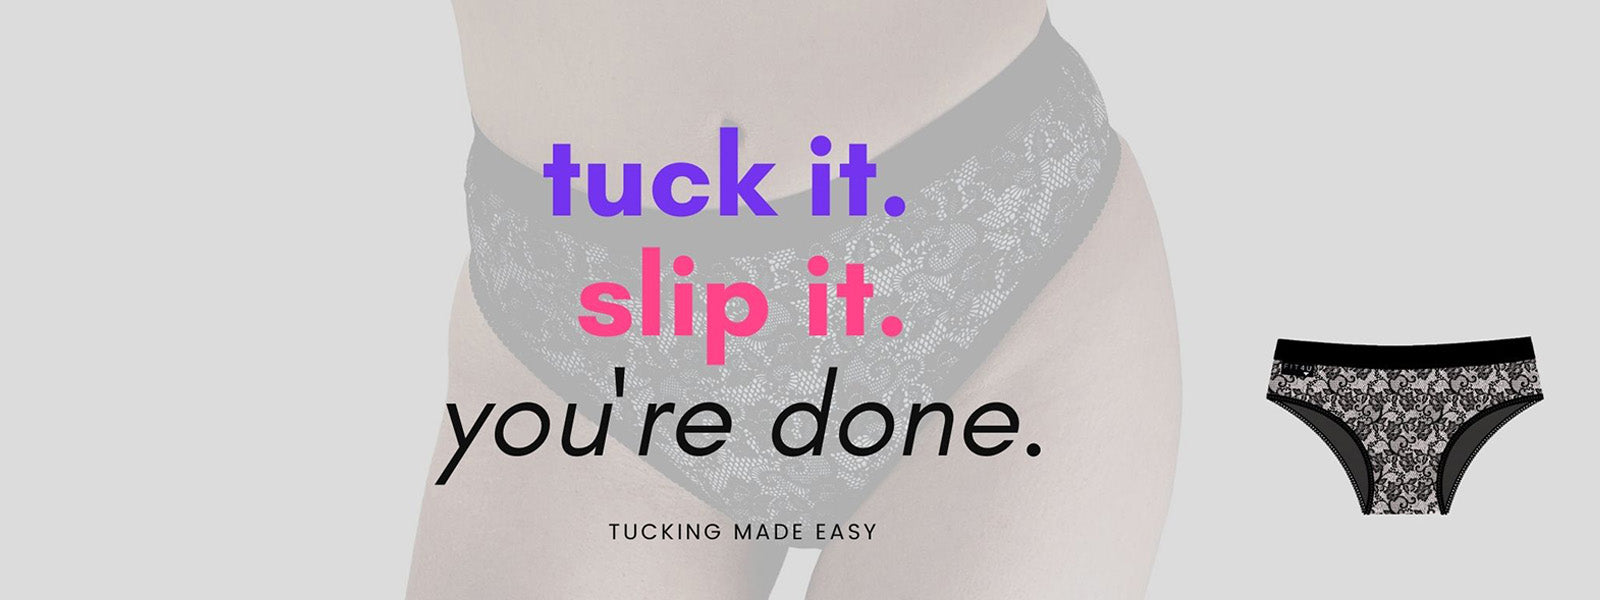 Tucking, made easy. Tuck it pic